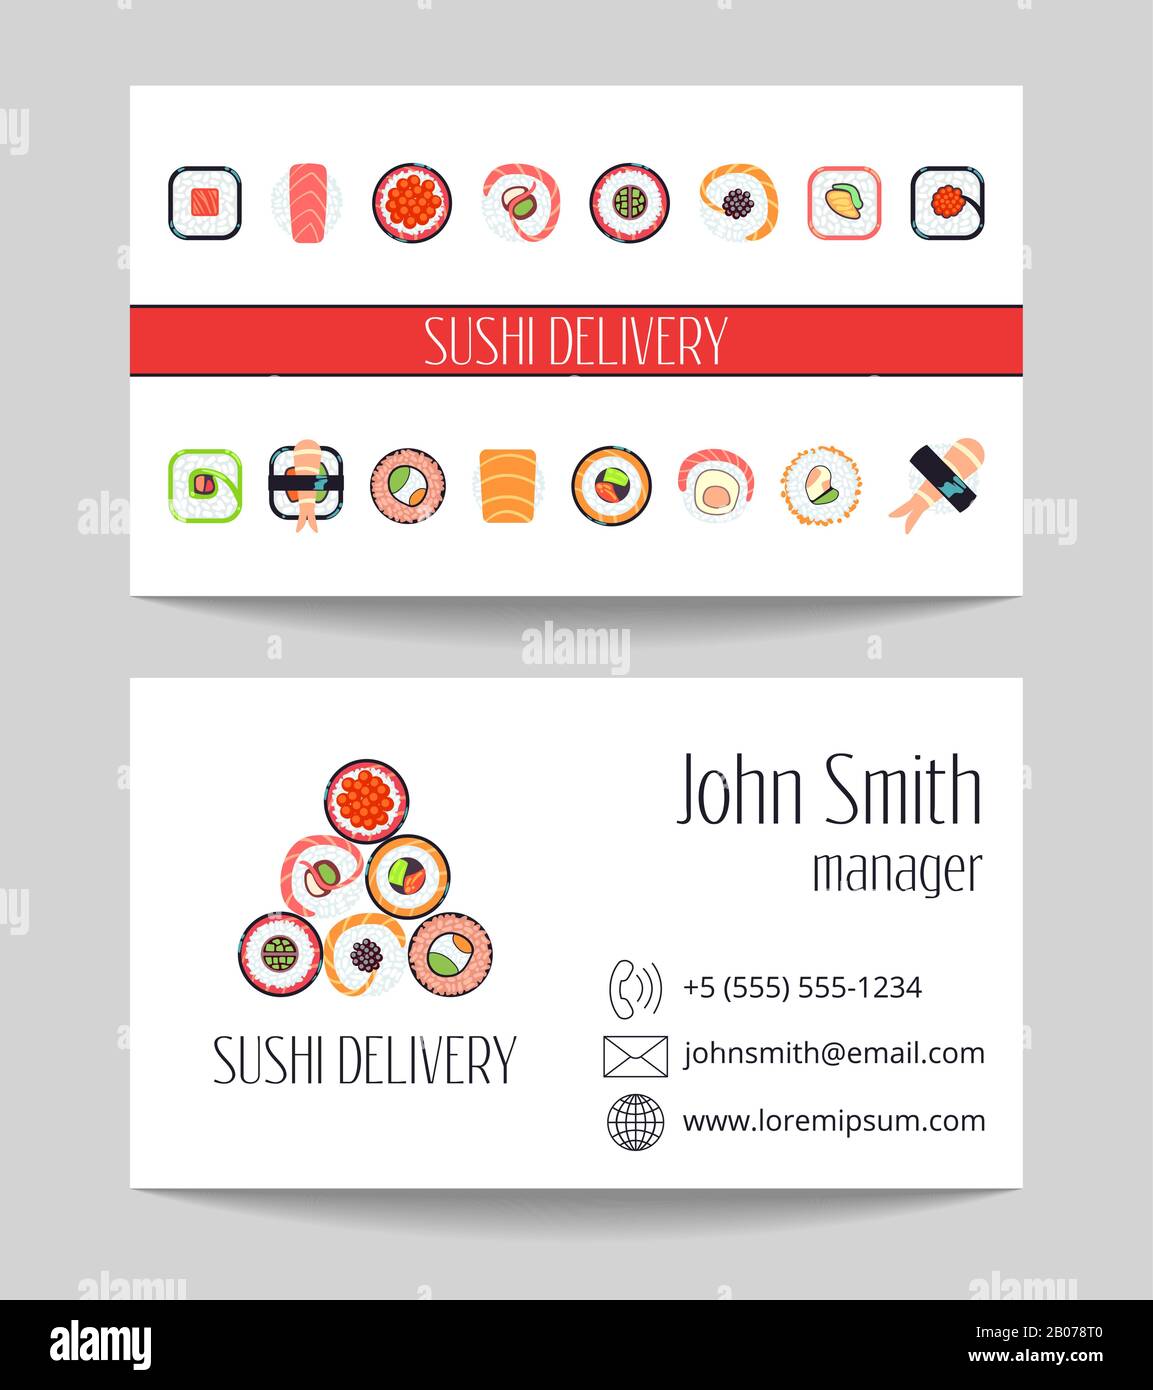 Sushi delivery business card both sides vector template. Design of asian food illustration Stock Vector